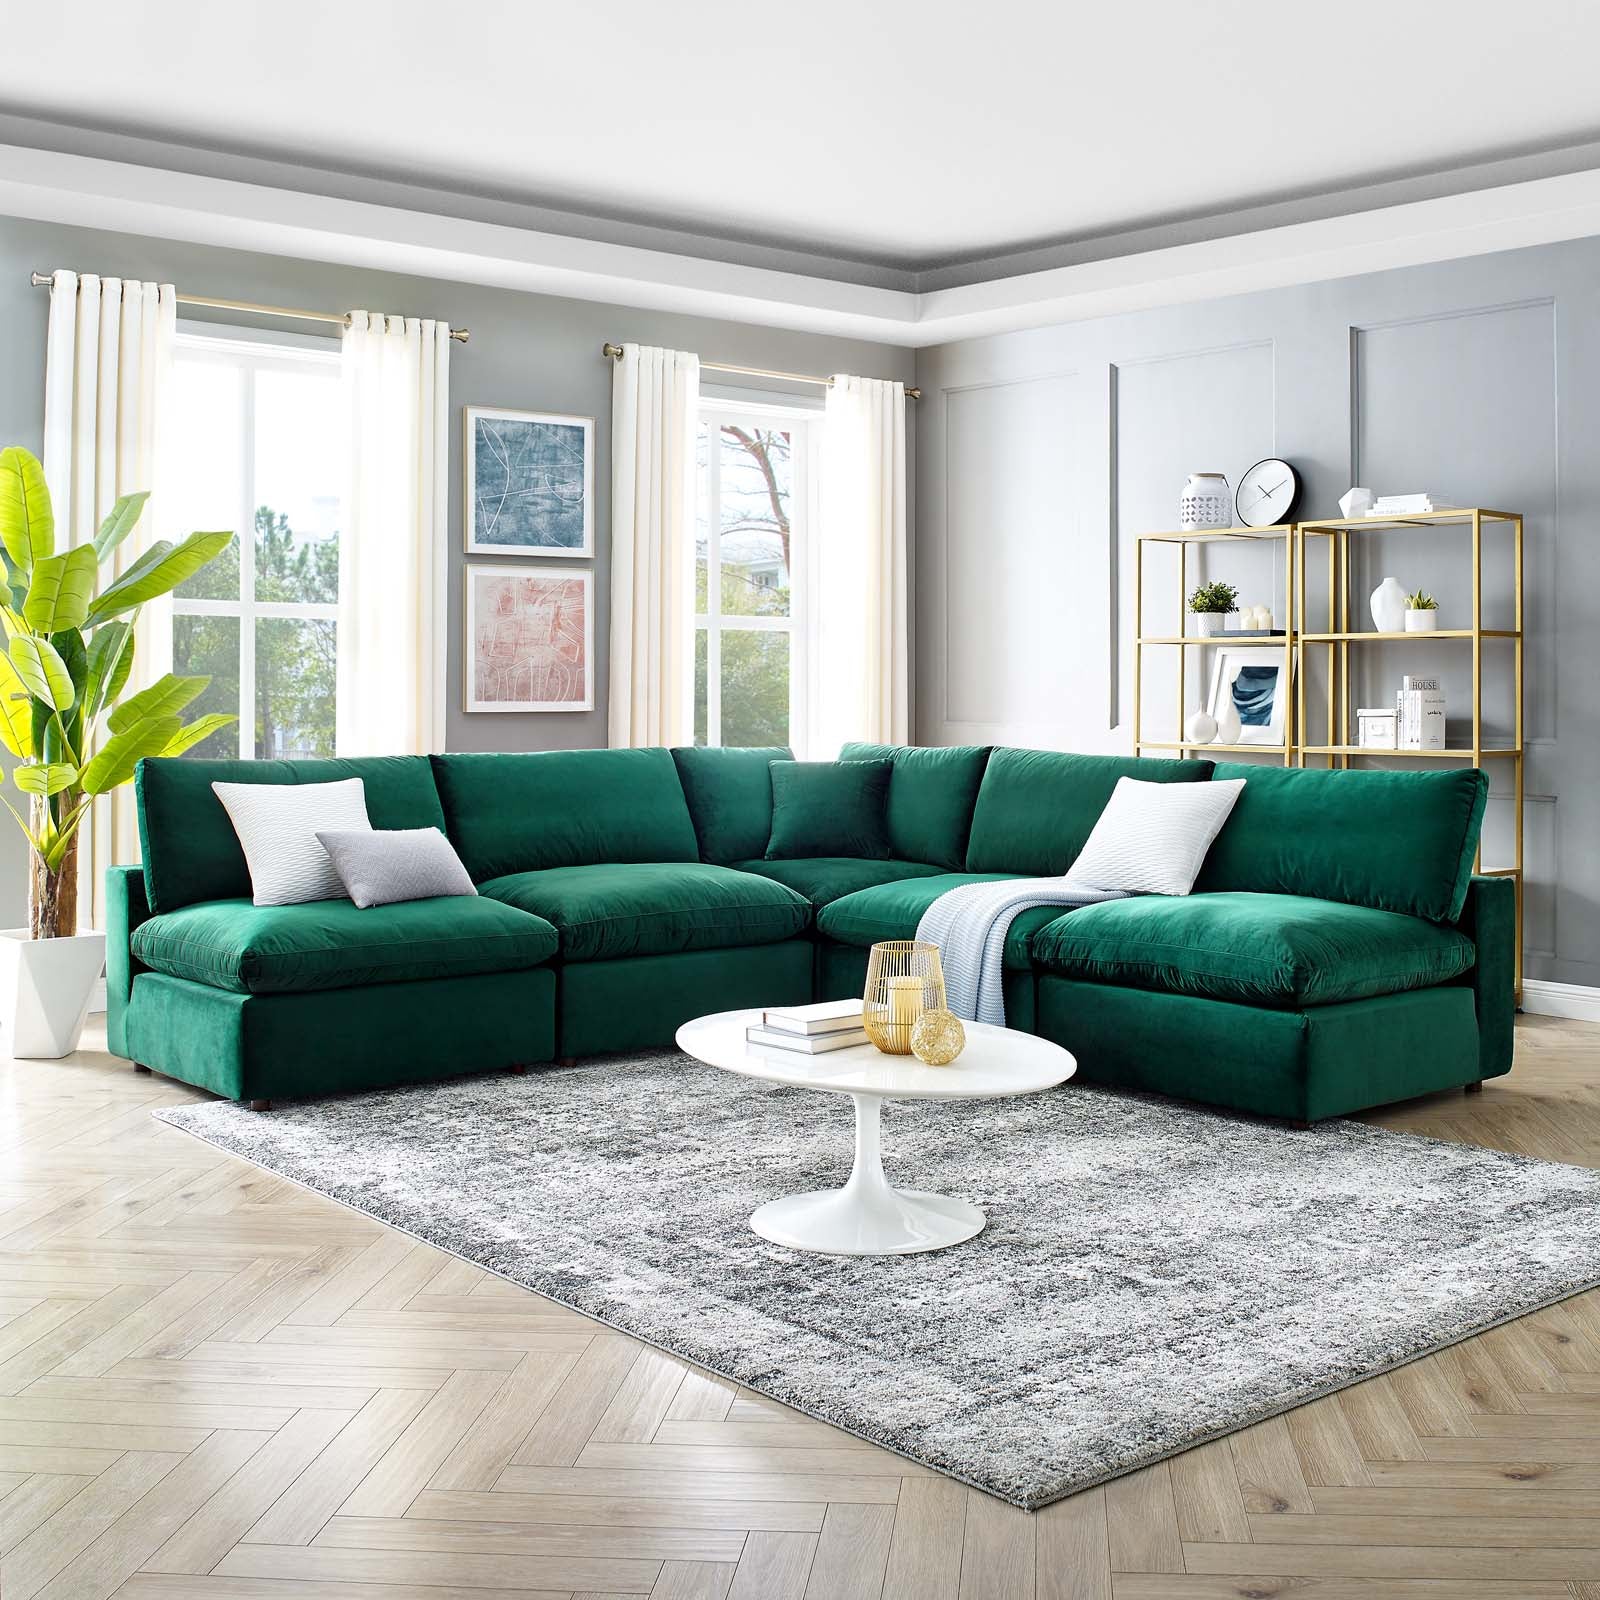 Modway Sectional Sofas - Commix Down Filled Overstuffed Performance Velvet 5-Piece Sectional Sofa Green